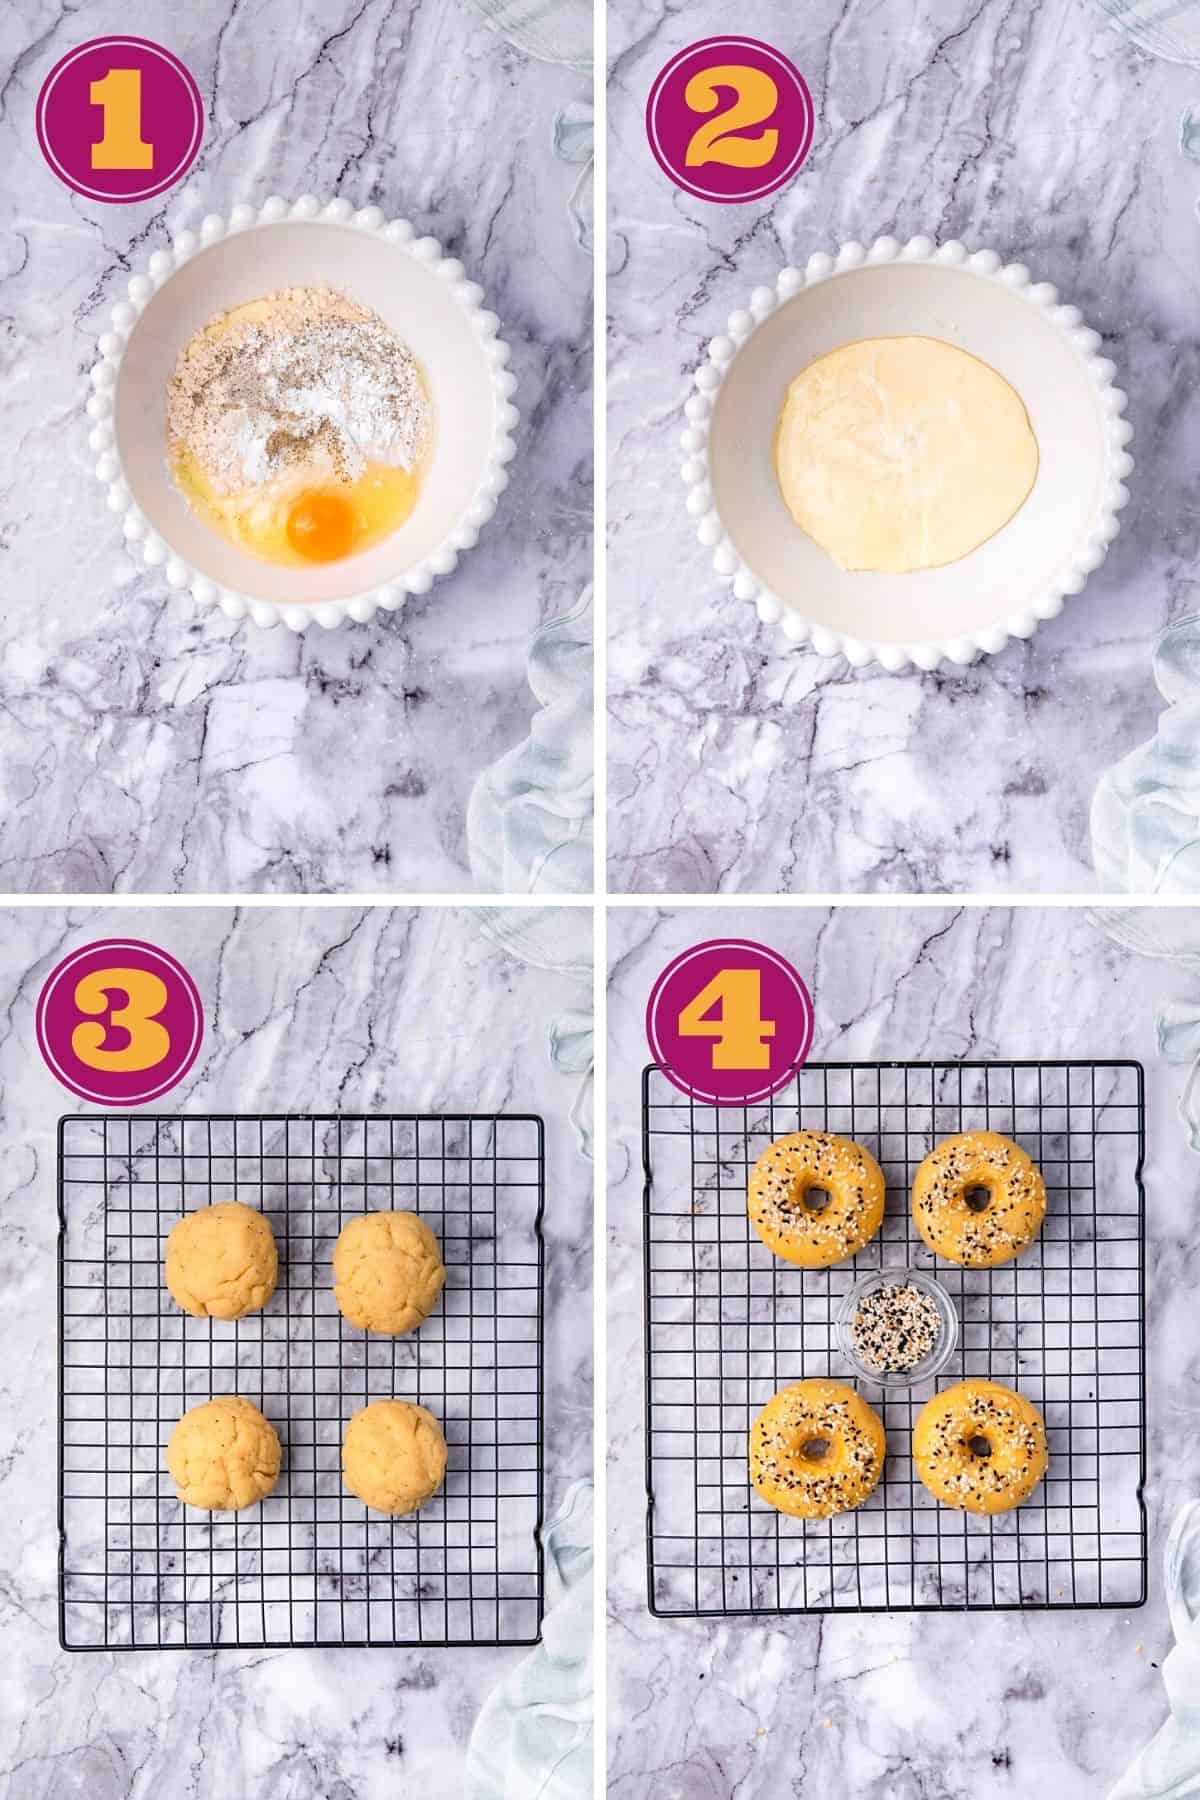 step-by-step instructions for how to make Keto Bagels with almond flour fathead dough